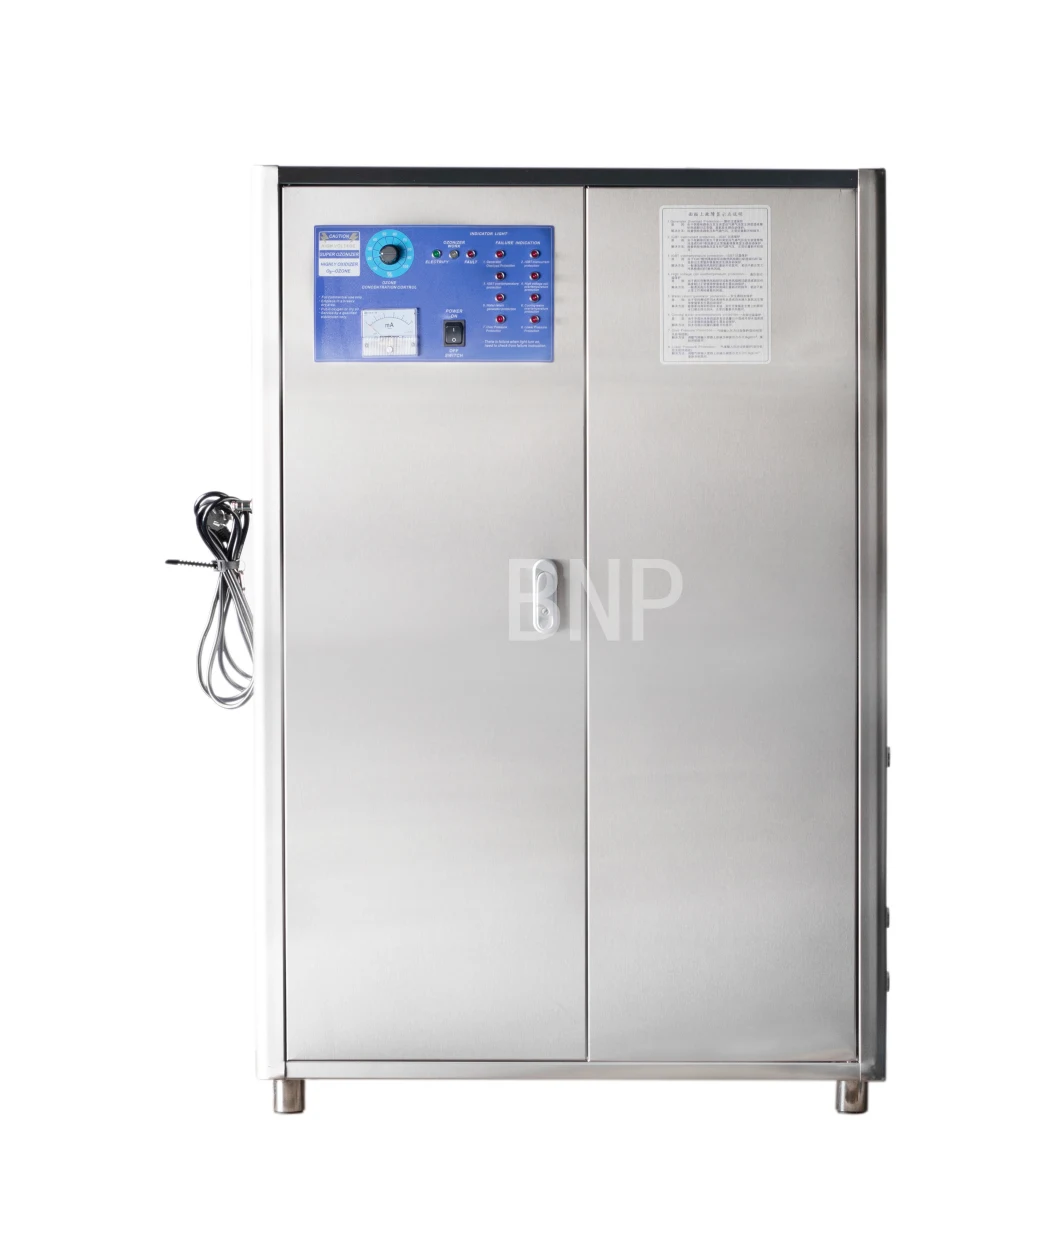 Bnp Manufacturer Yw-50g Industrial Ozone Generator for Air Pool Water Treatment